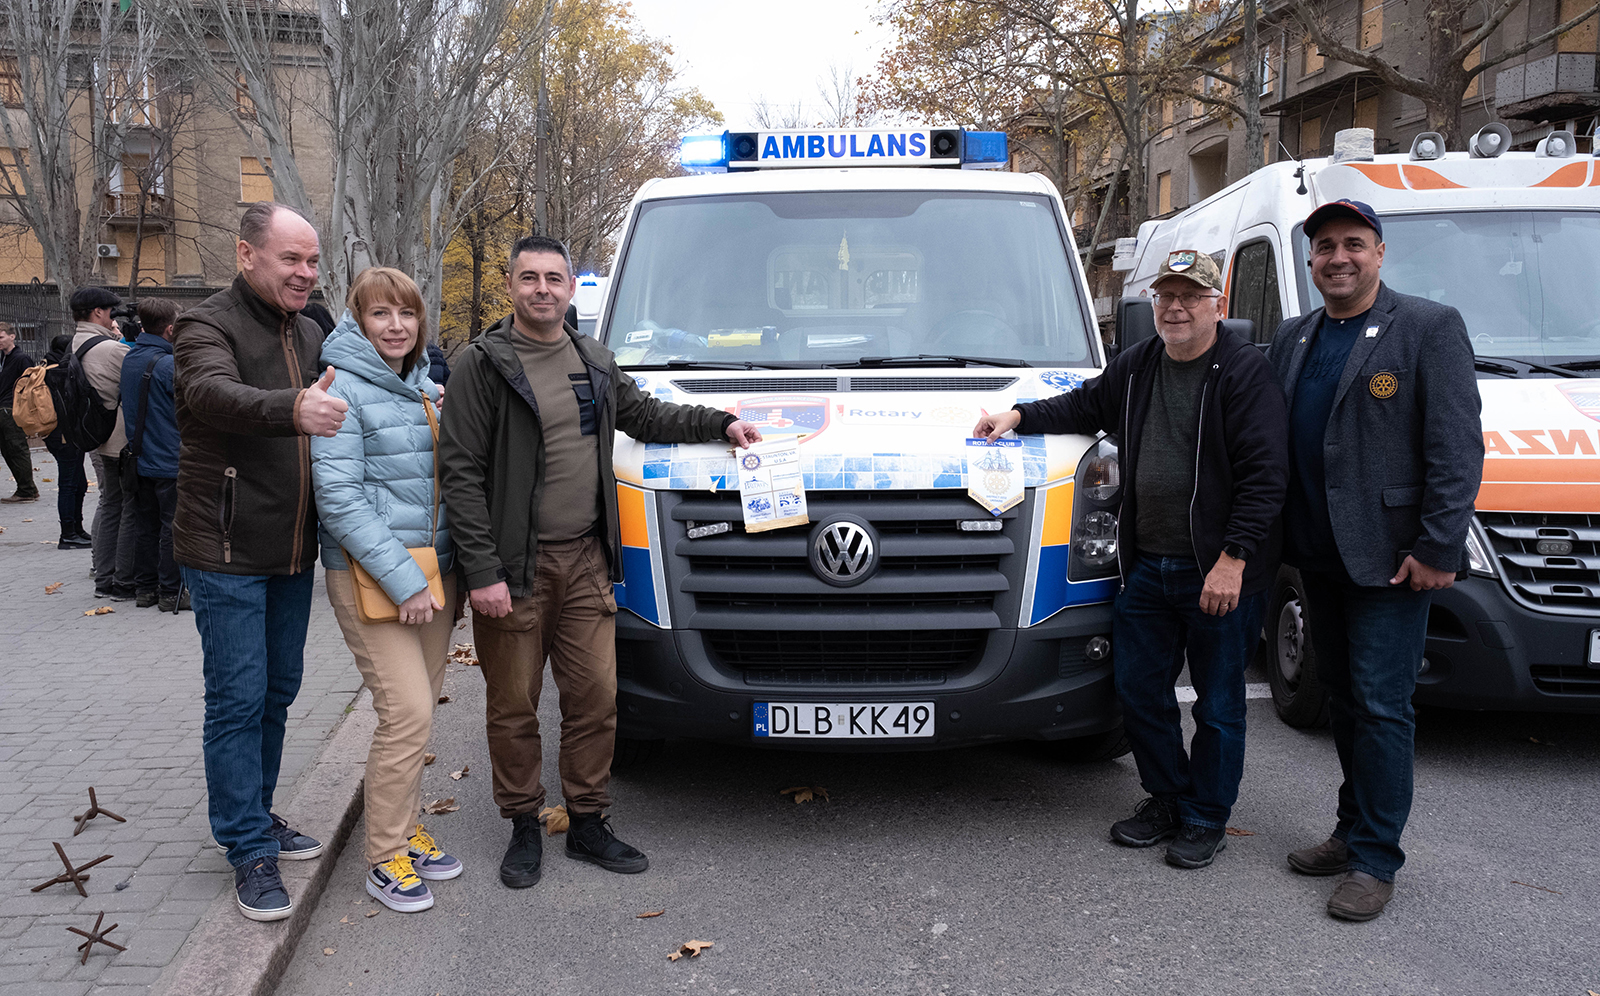 Numerous people from the Mykolaiv Oblast province of Ukraine as alumnus Michael Quillen delivers an ambulance to them.